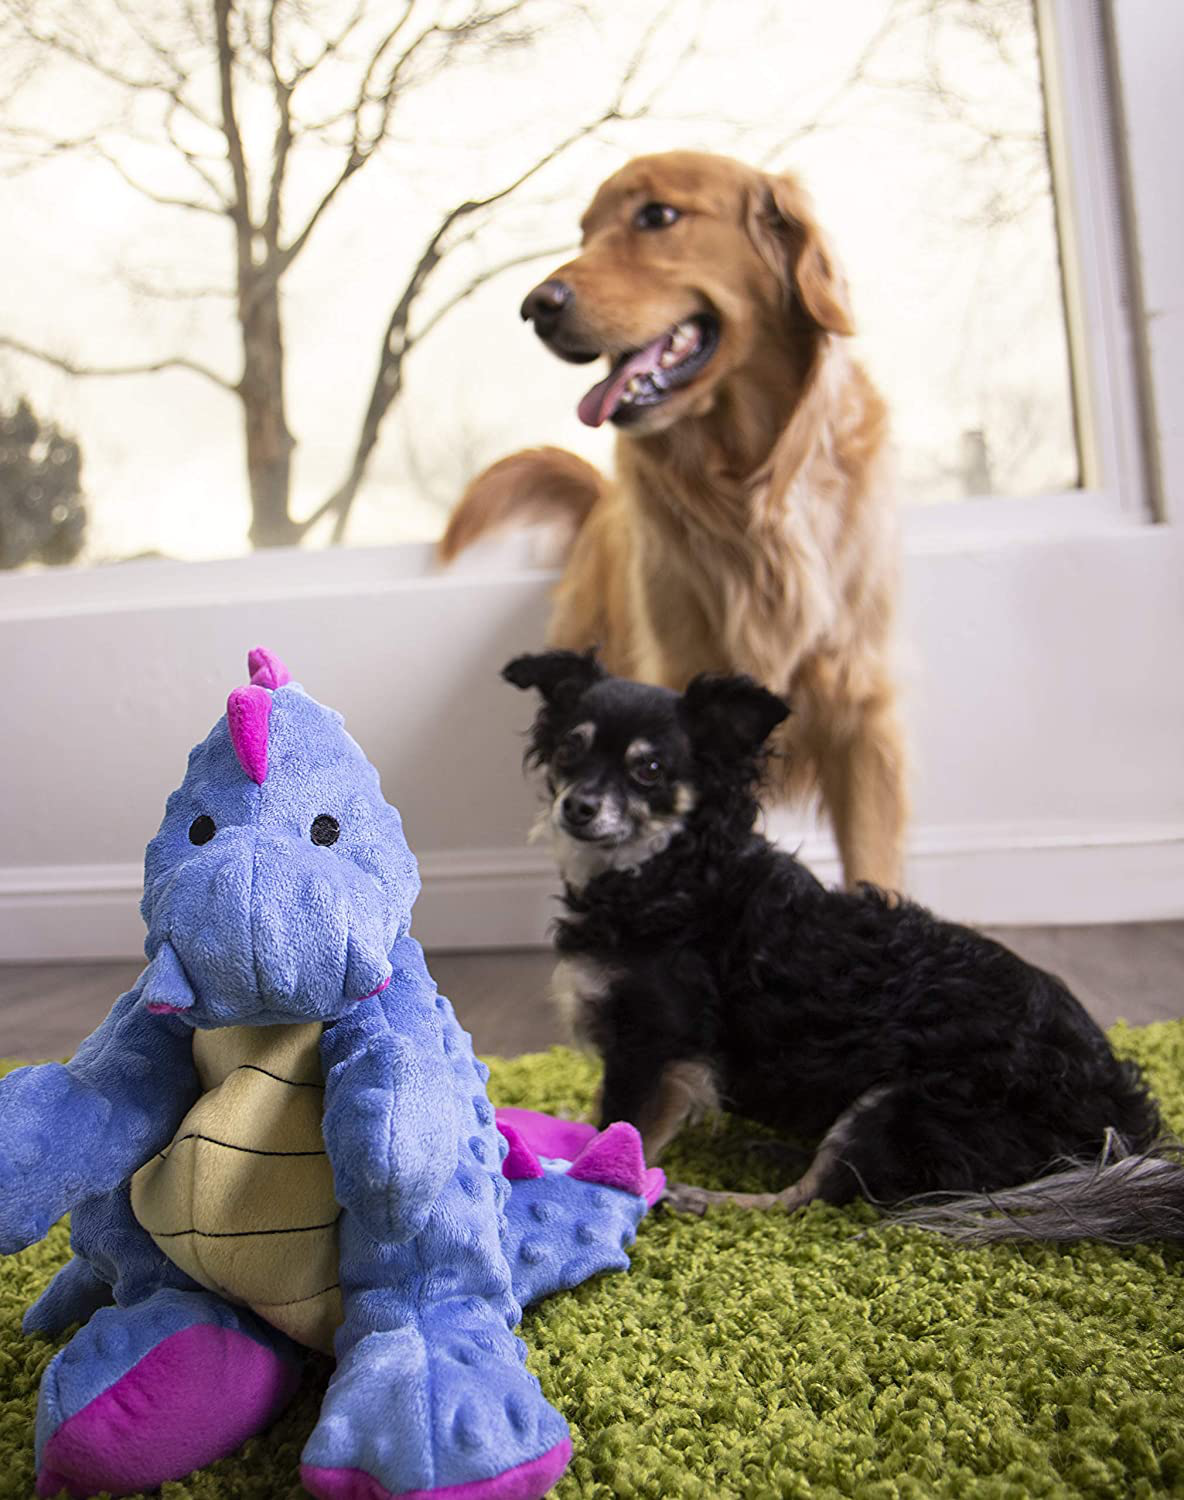 Godog, Dragons, Squeaker Dog Toy, Chew Resistant, Durable Plush, Soft, Tough, Reinforced Seams, Periwinkle, Extra Large